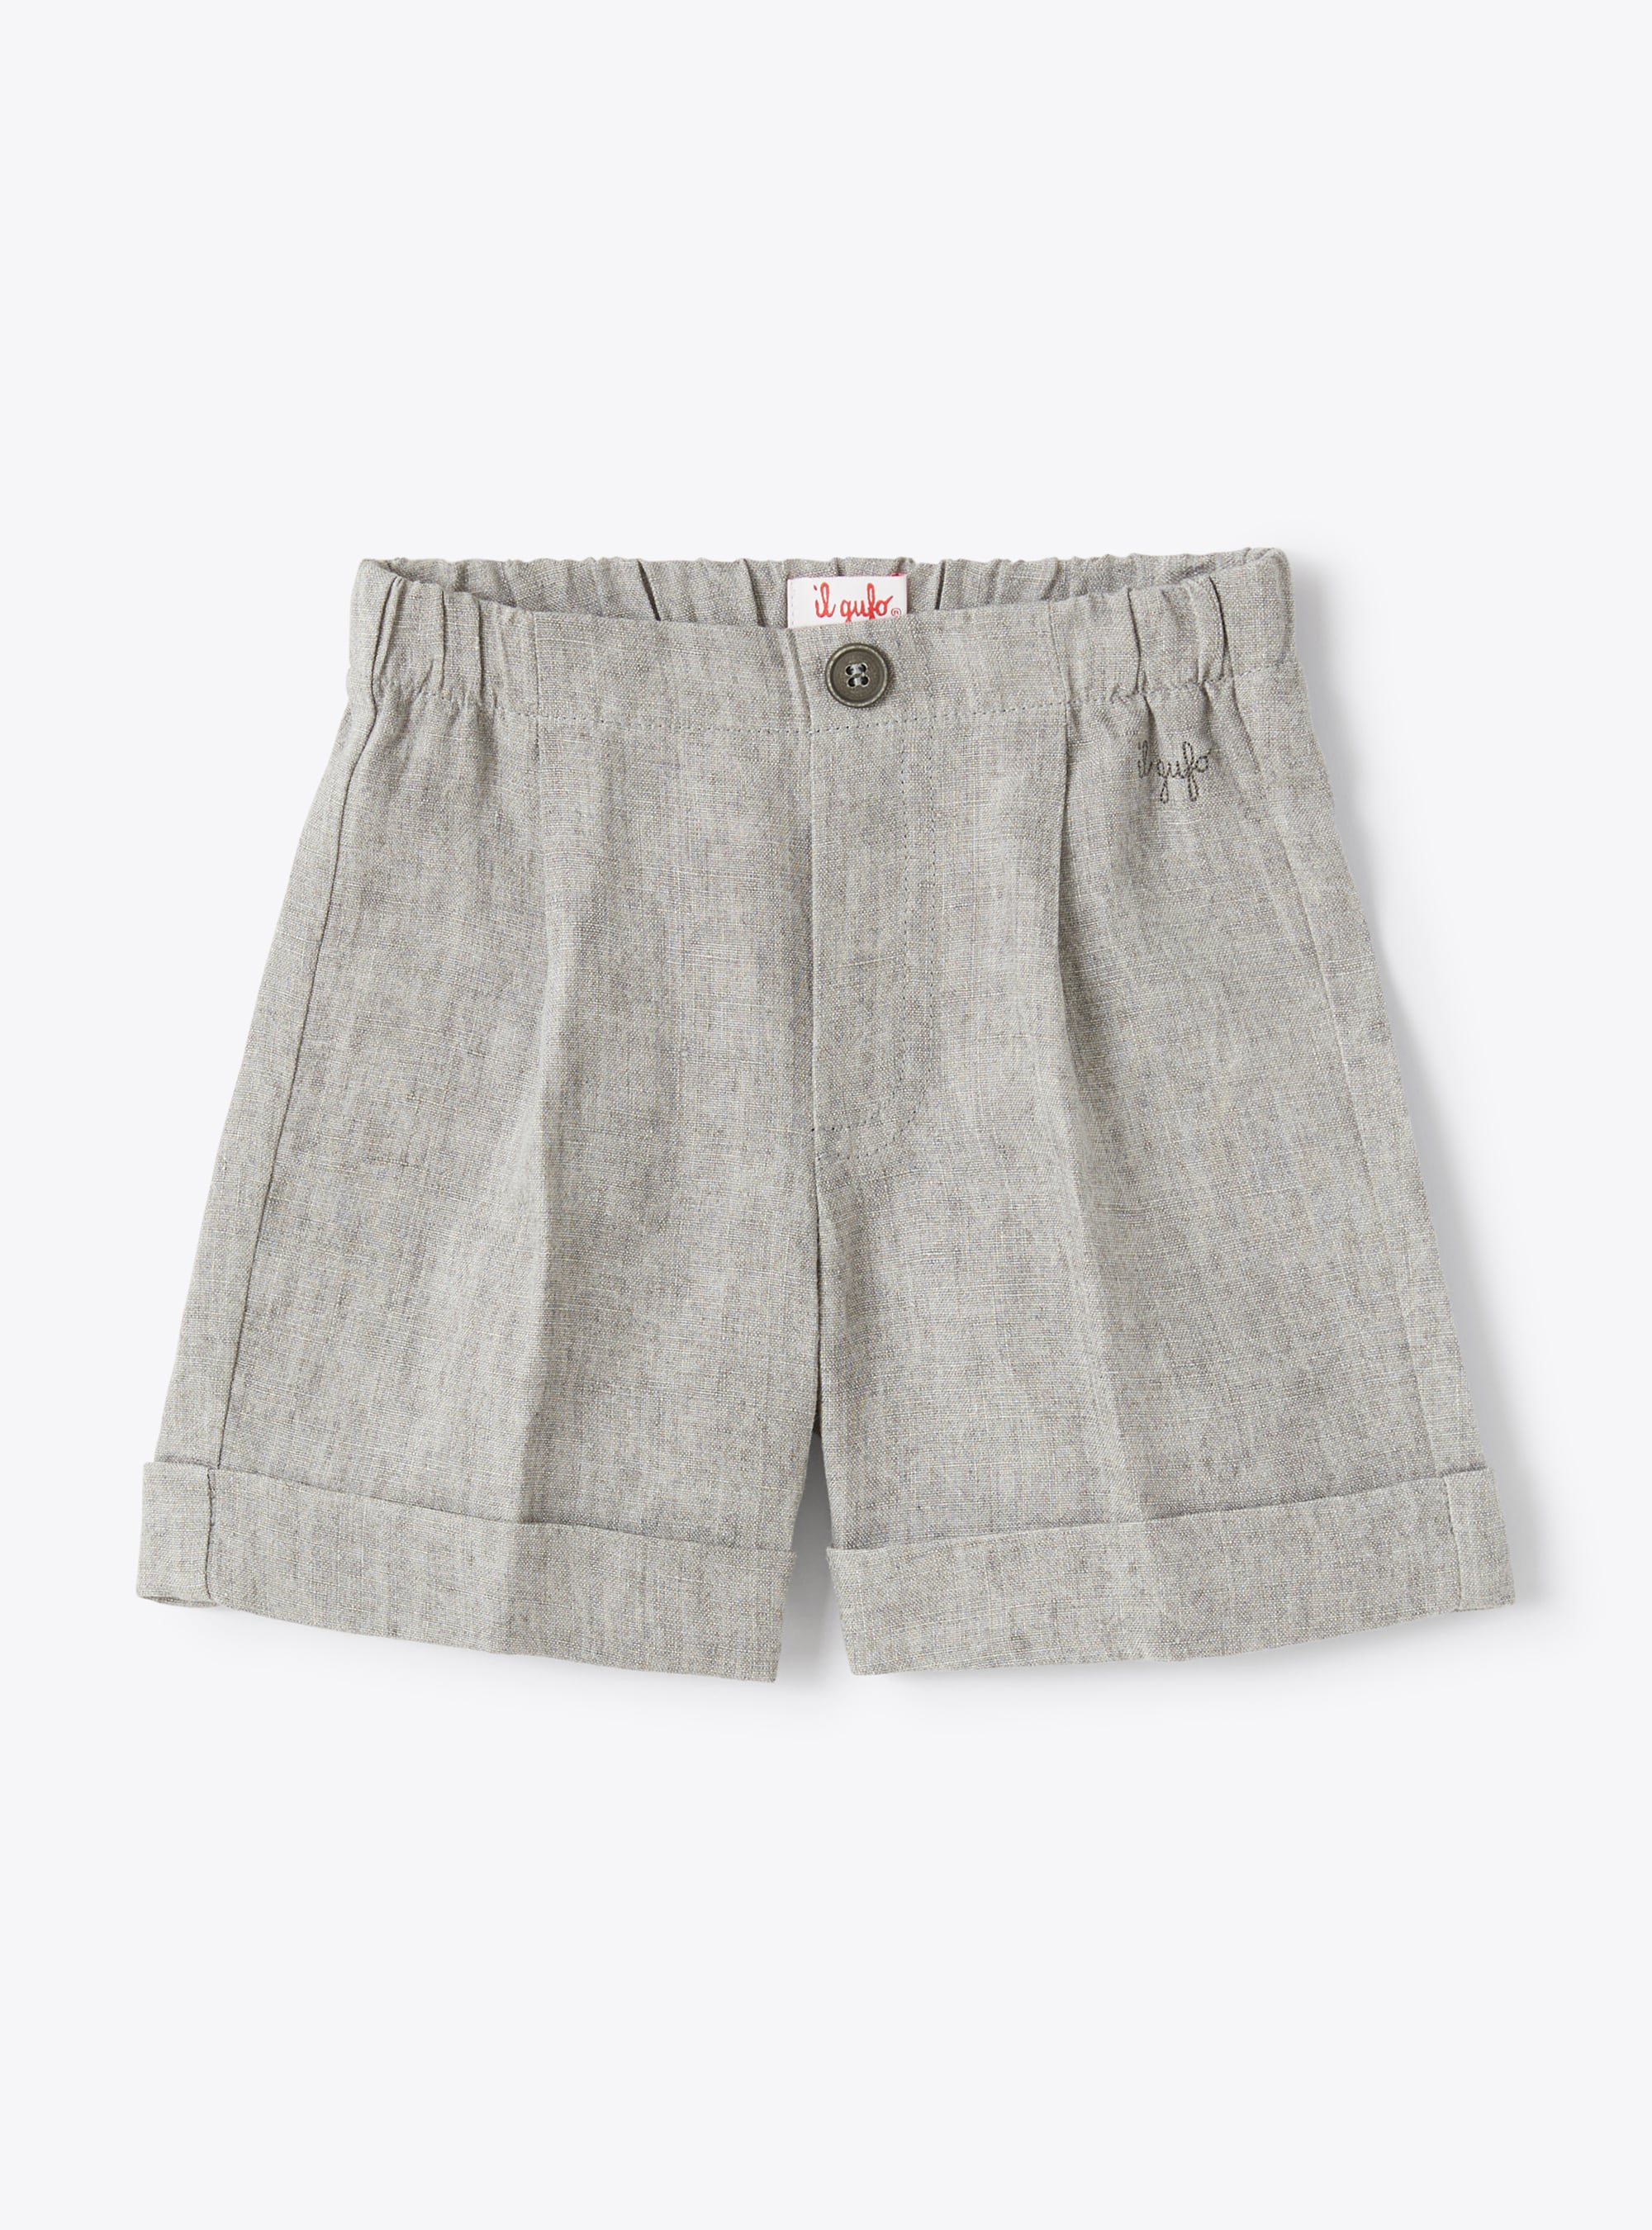 Bermuda shorts in muted-grey linen - Trousers - Il Gufo